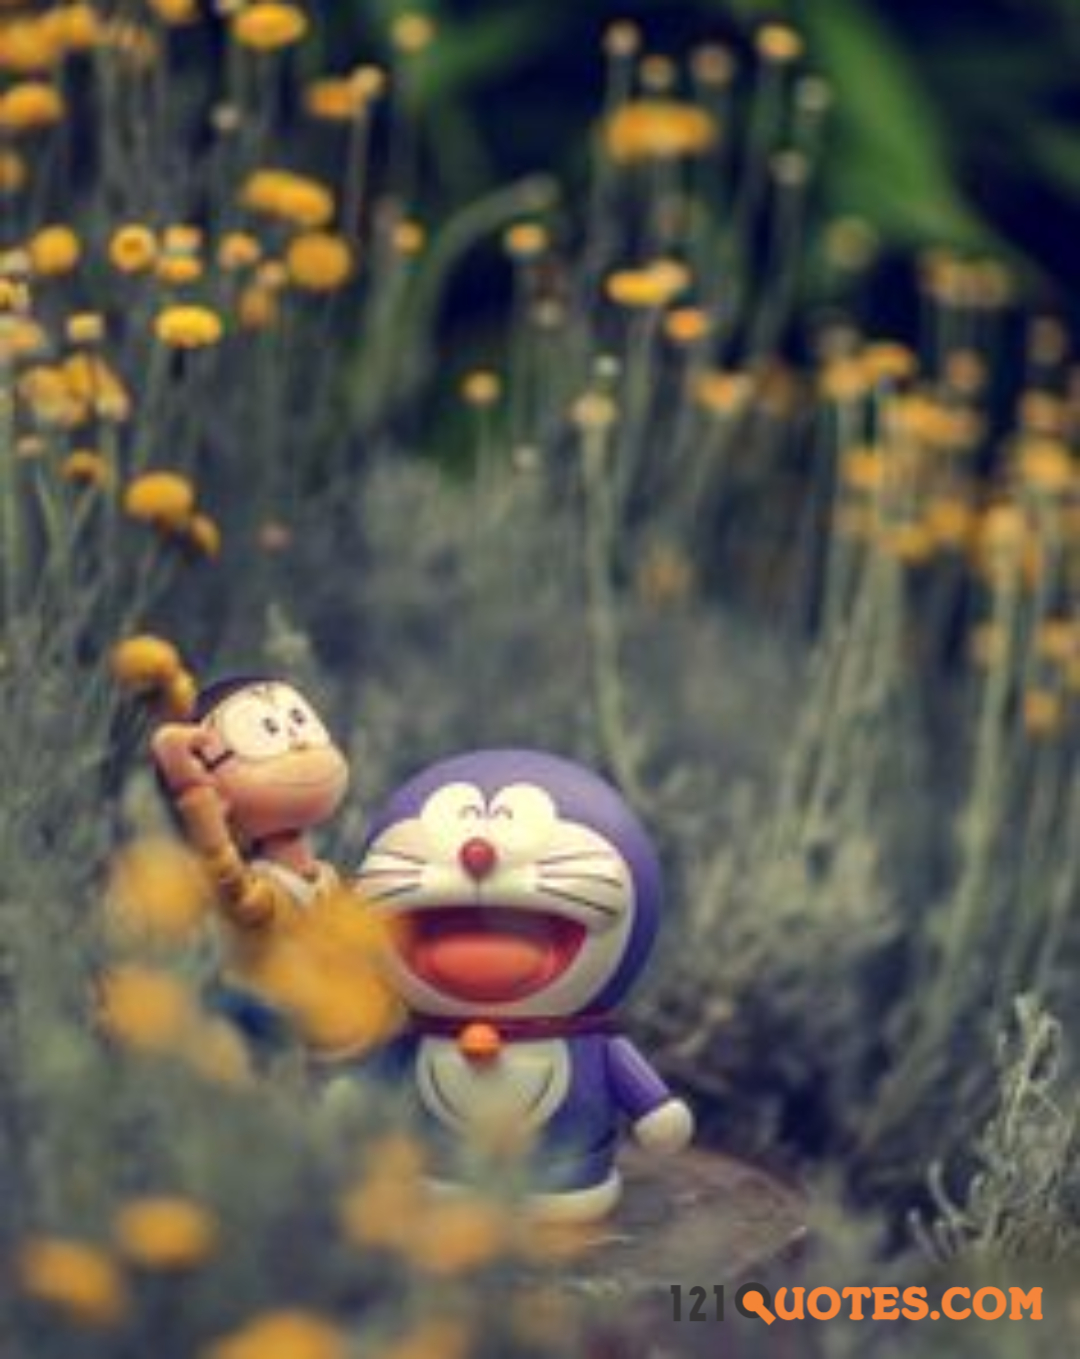 500 Cute Doraemon Wallpapers  Background Beautiful Best Available For  Download Cute Doraemon Images Free On Zicxacomphotos  Zicxa Photos